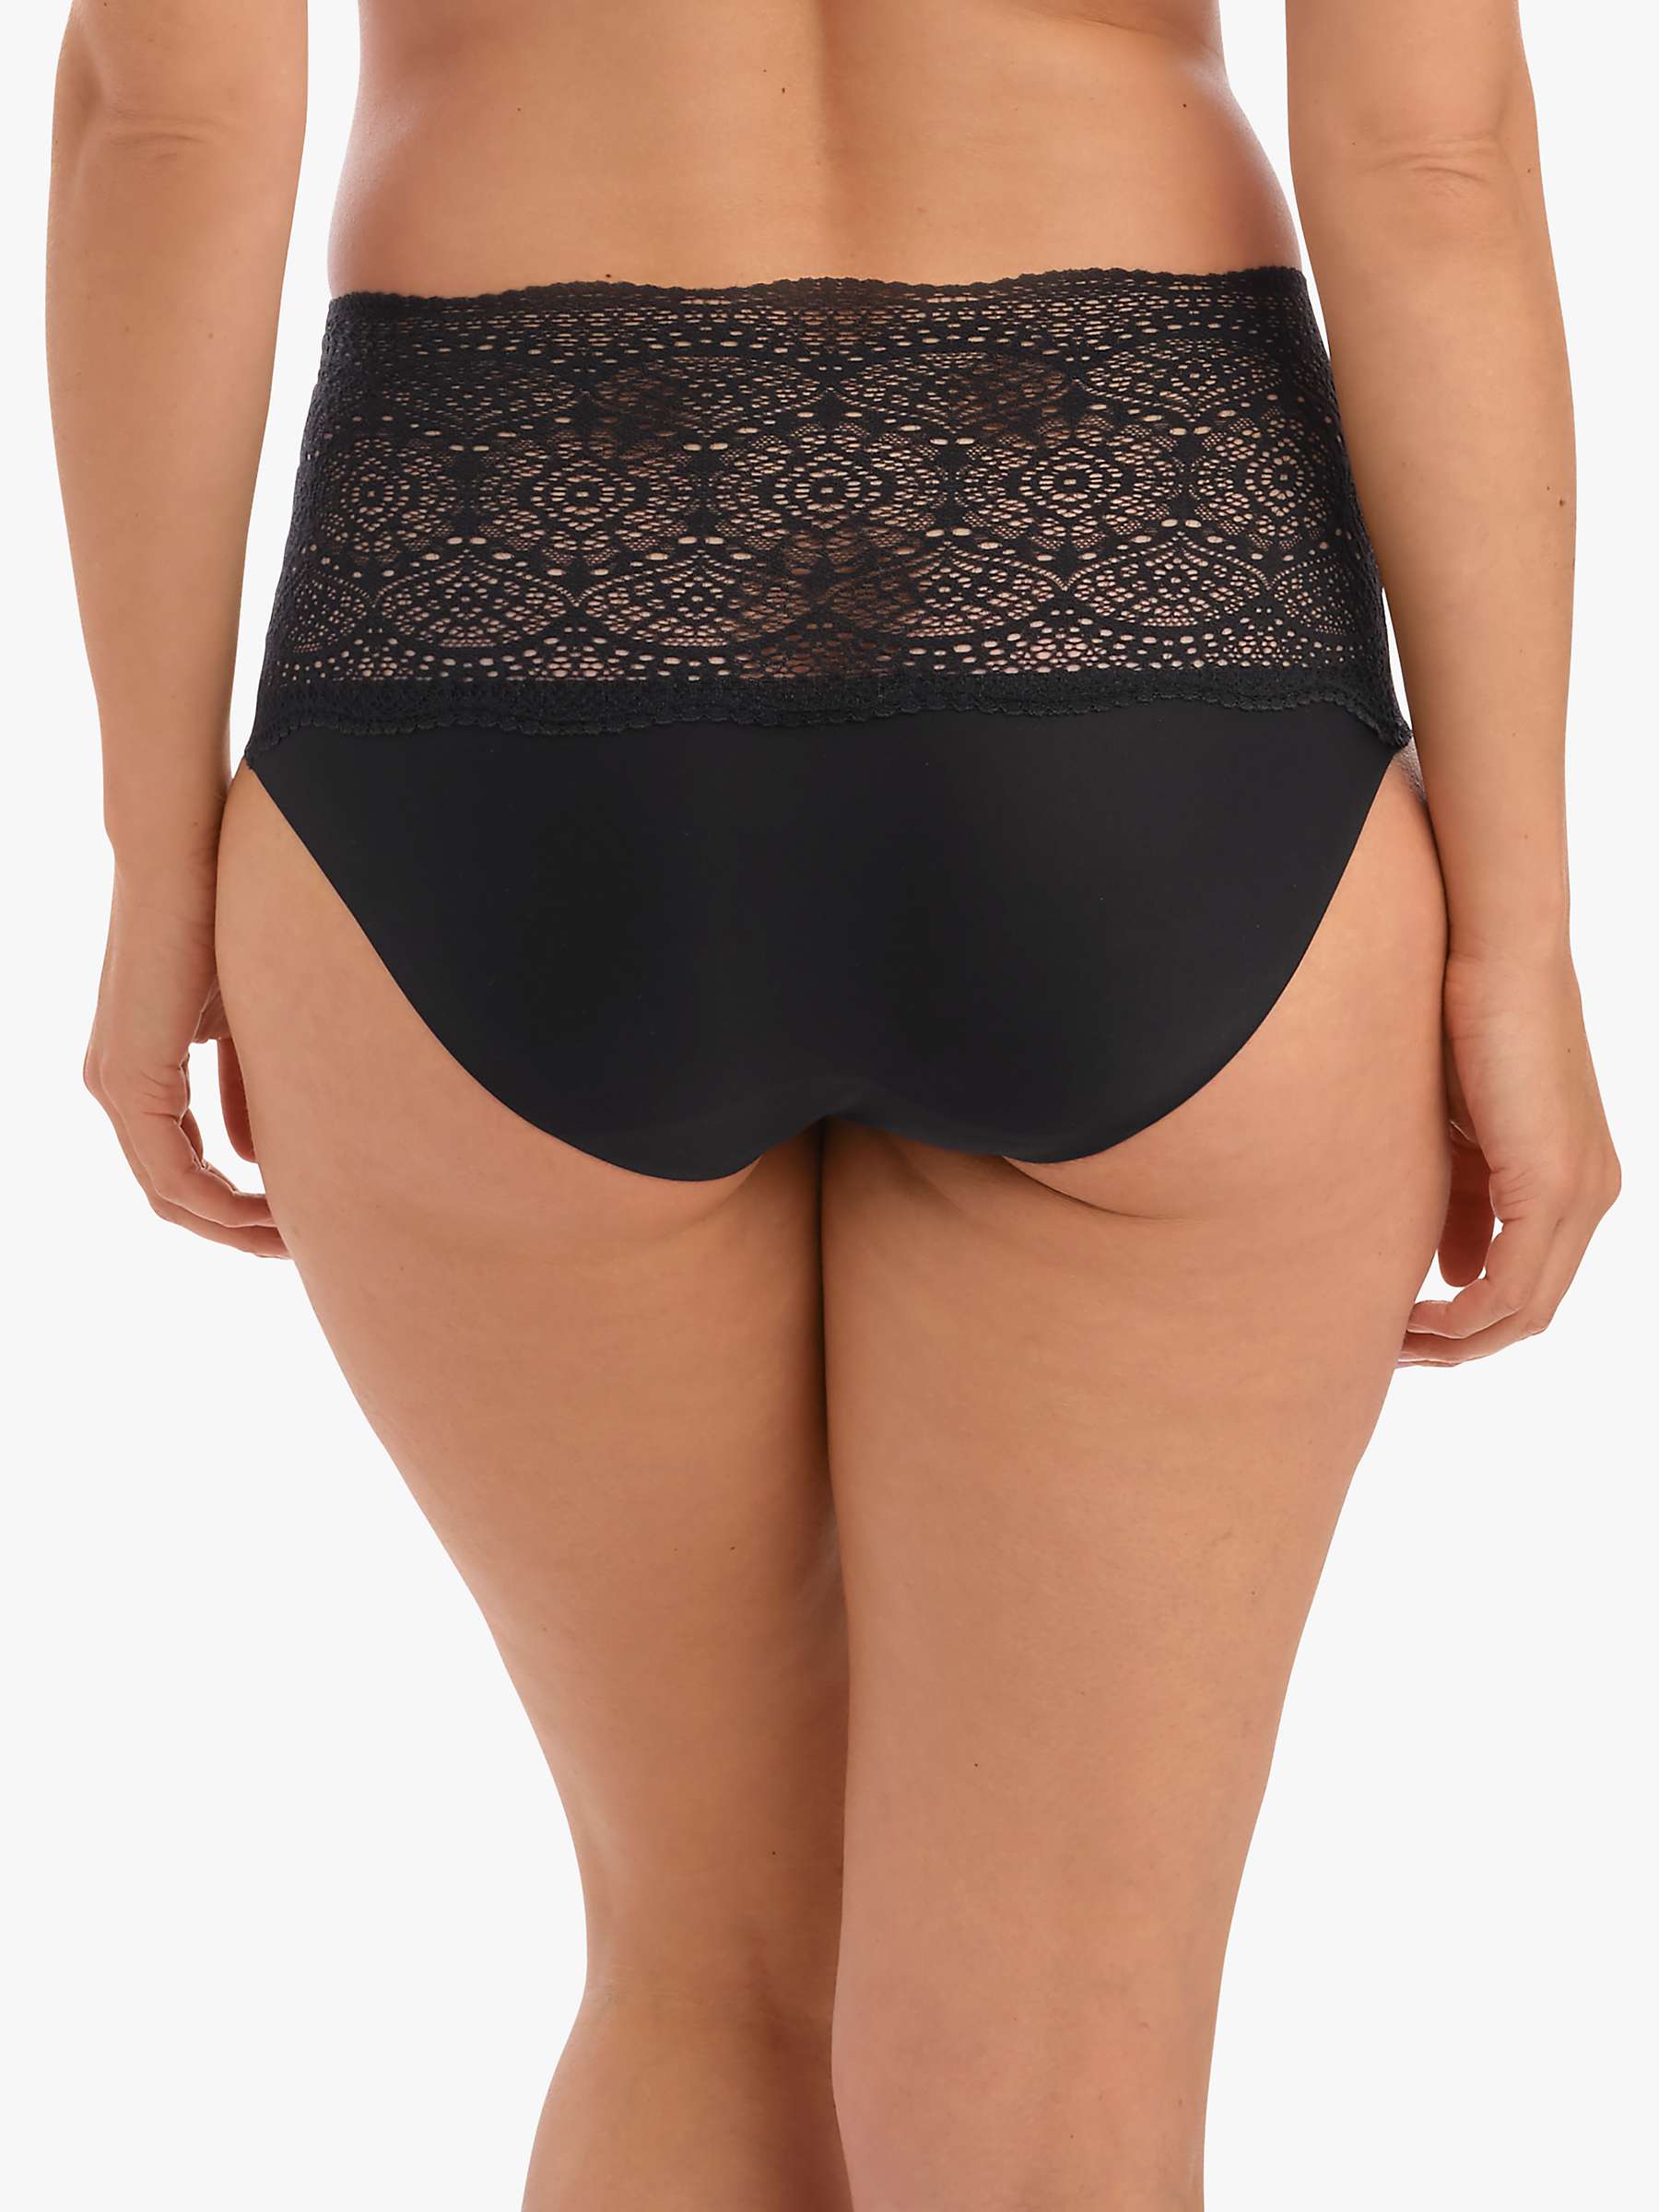 Buy Fantasie Lace Ease Invisible Stretch Knickers Online at johnlewis.com